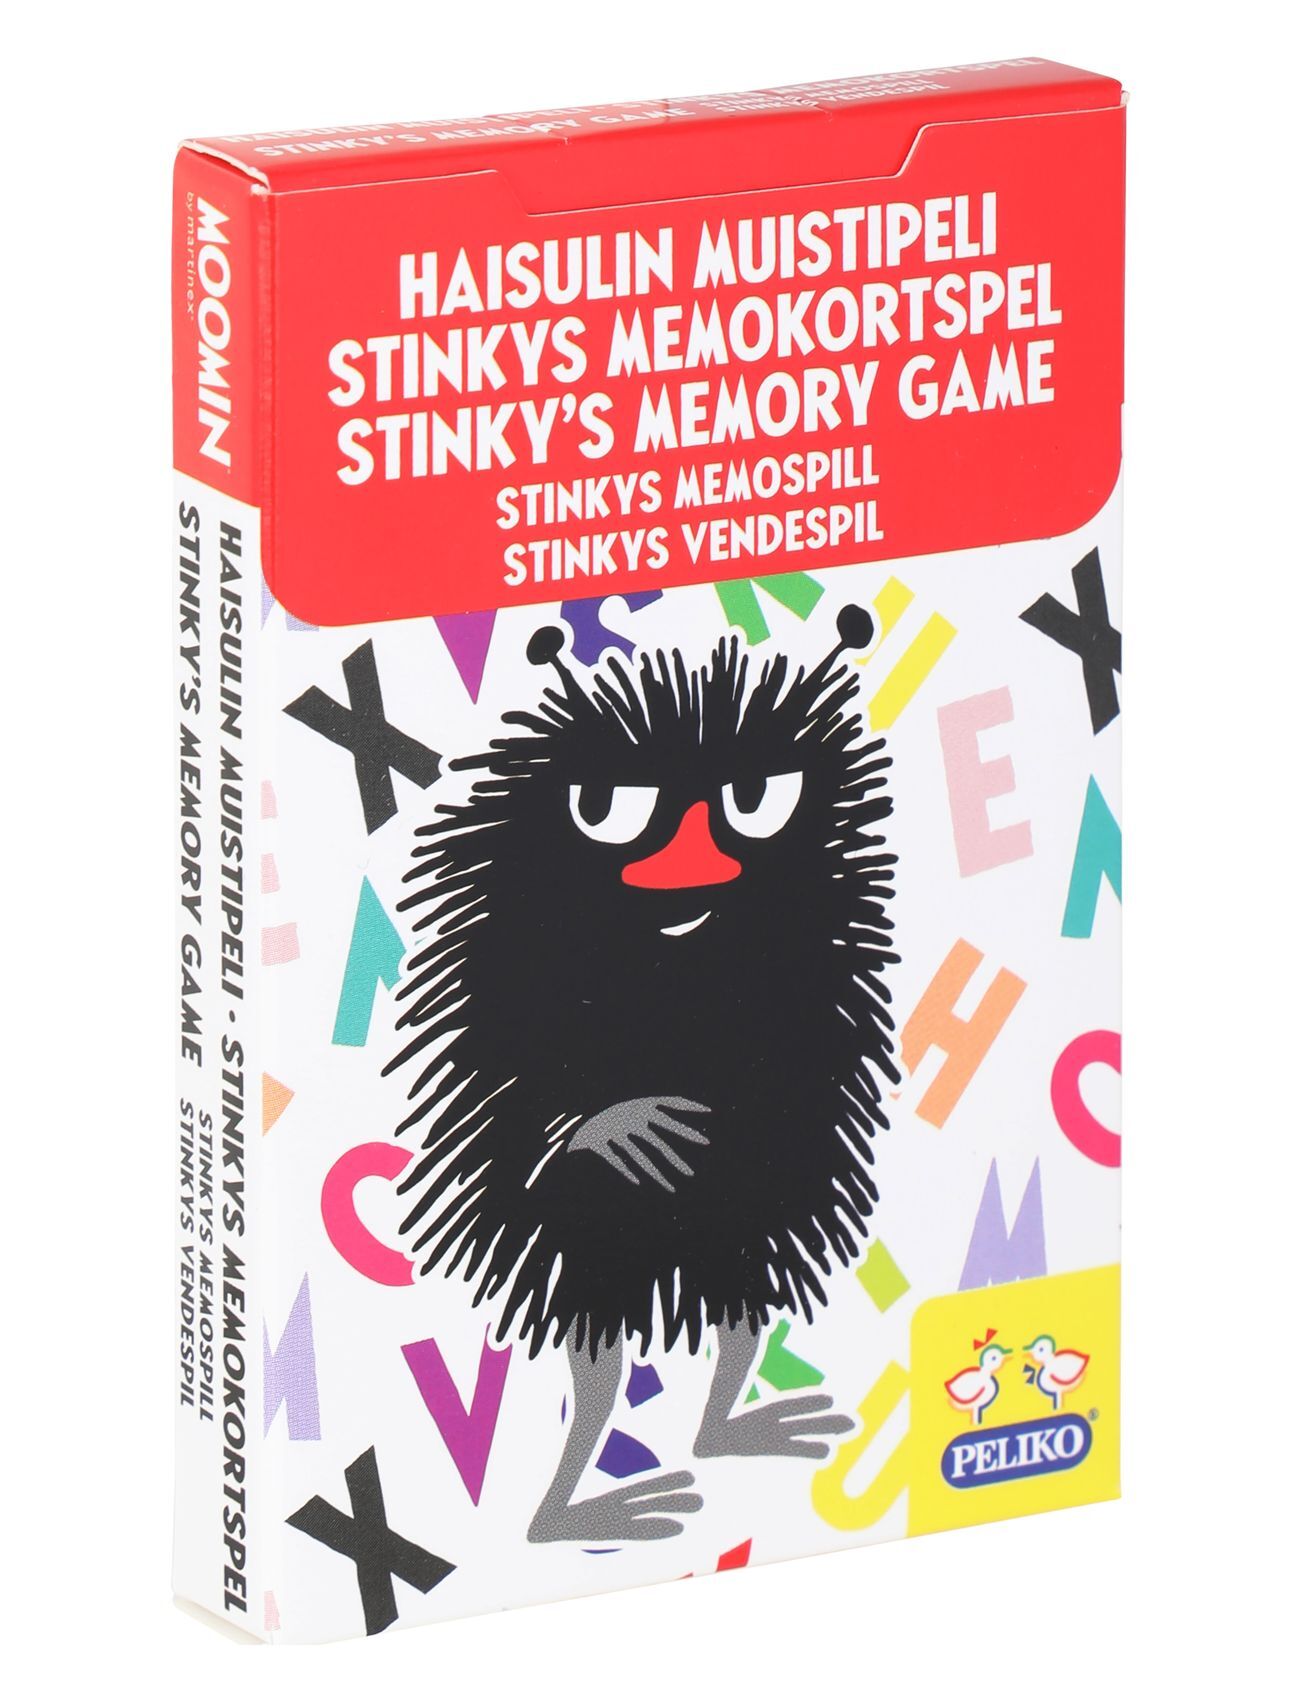 Martinex Stinky's Memo Card Game Toys Puzzles And Games Games Multi/mønstret Martinex